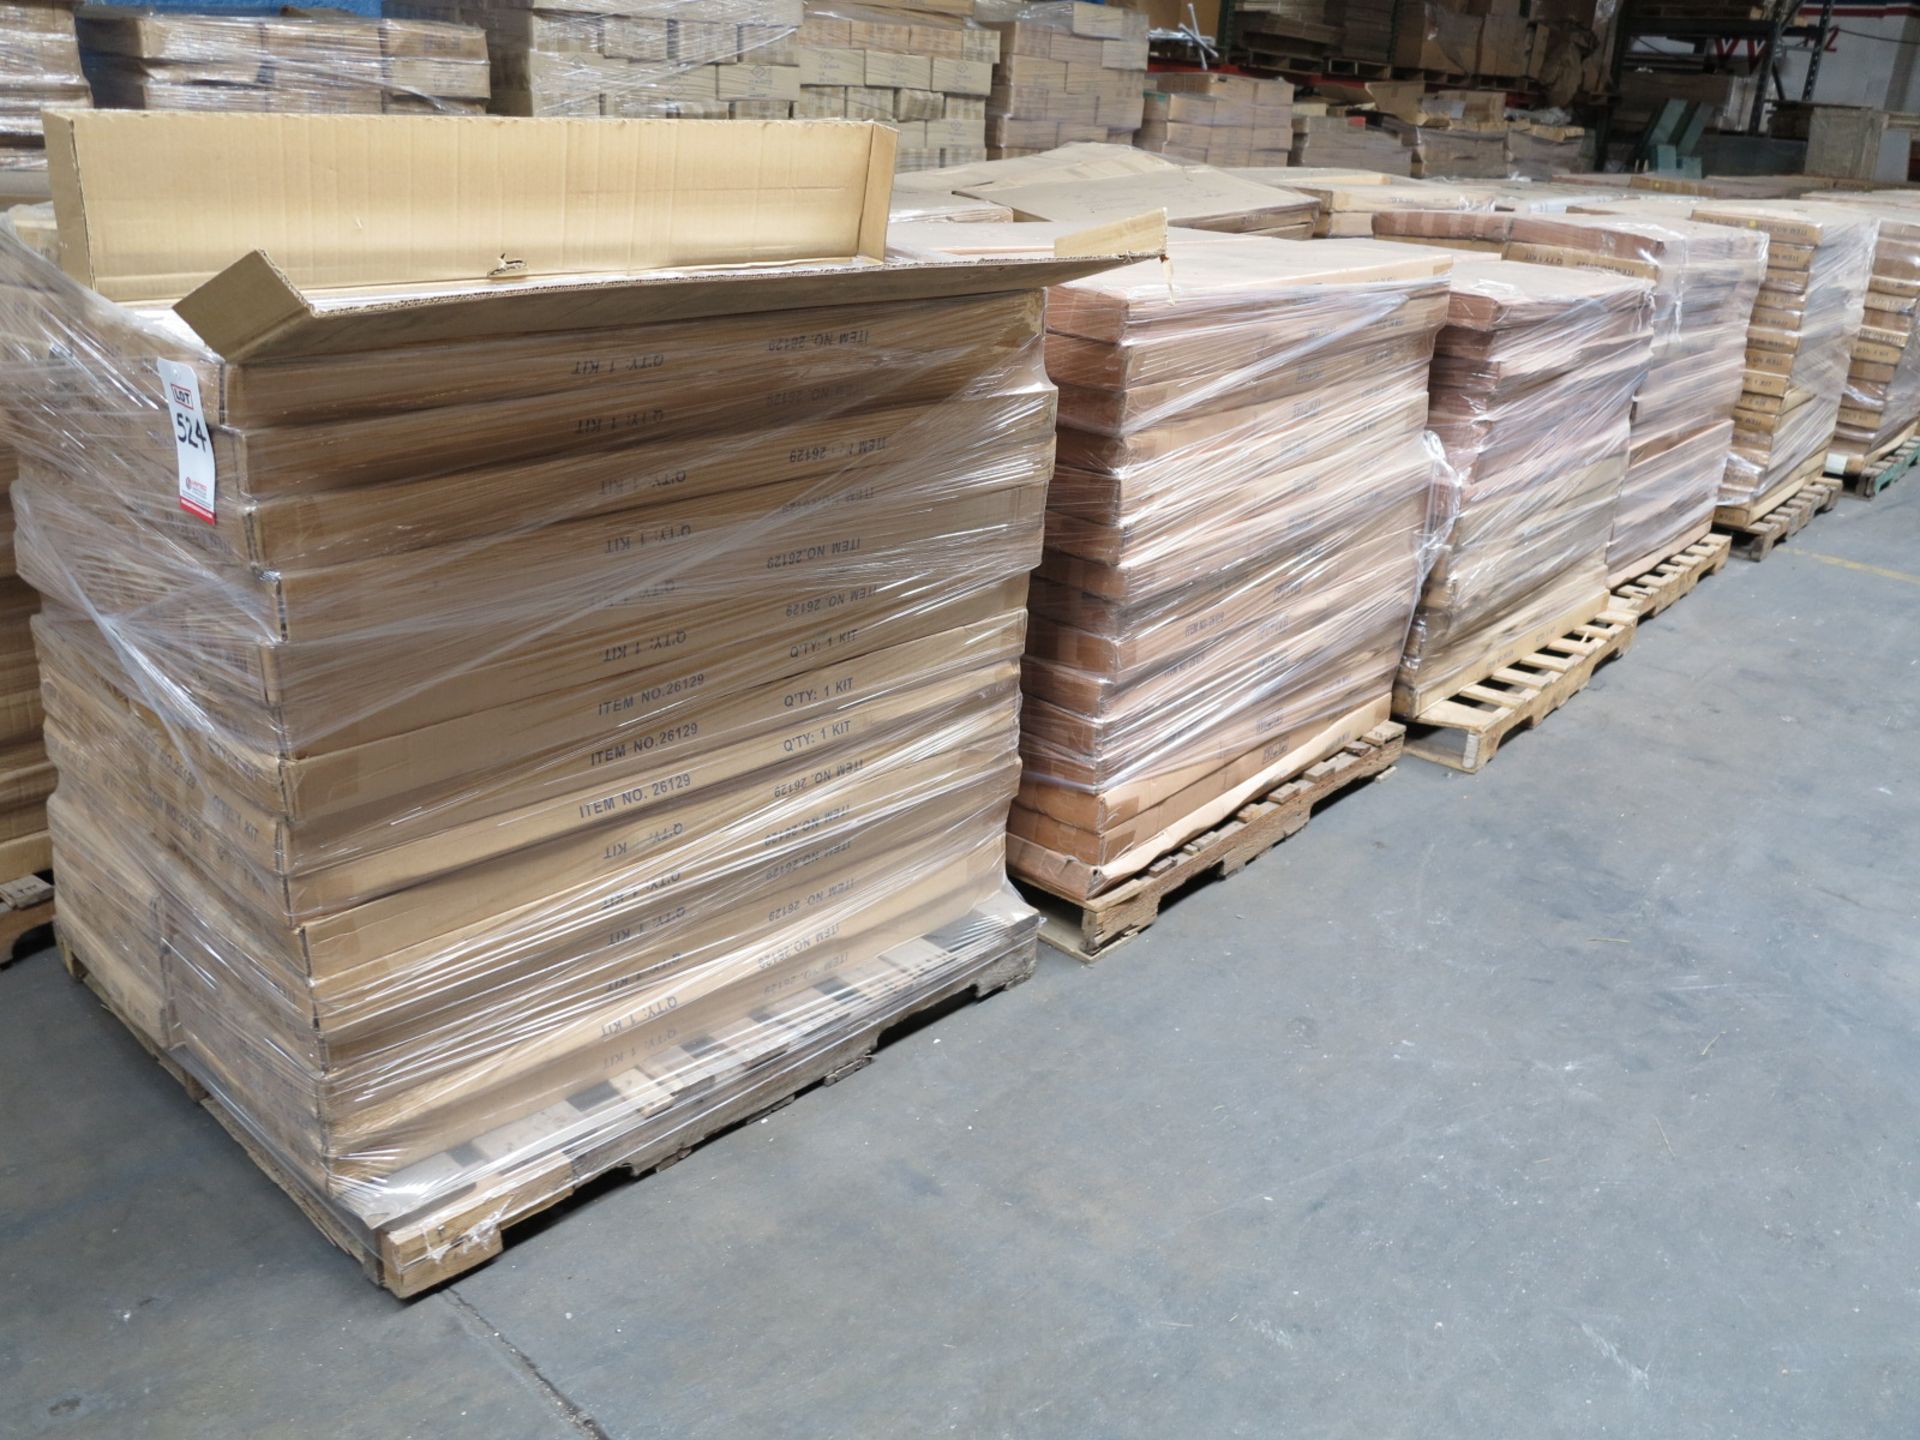 LOT - APPROX. (10) PALLETS ON FLOOR TO INCLUDE: ITEM #26129, 2 WAY COSTUMER W CASTERS (S/2),